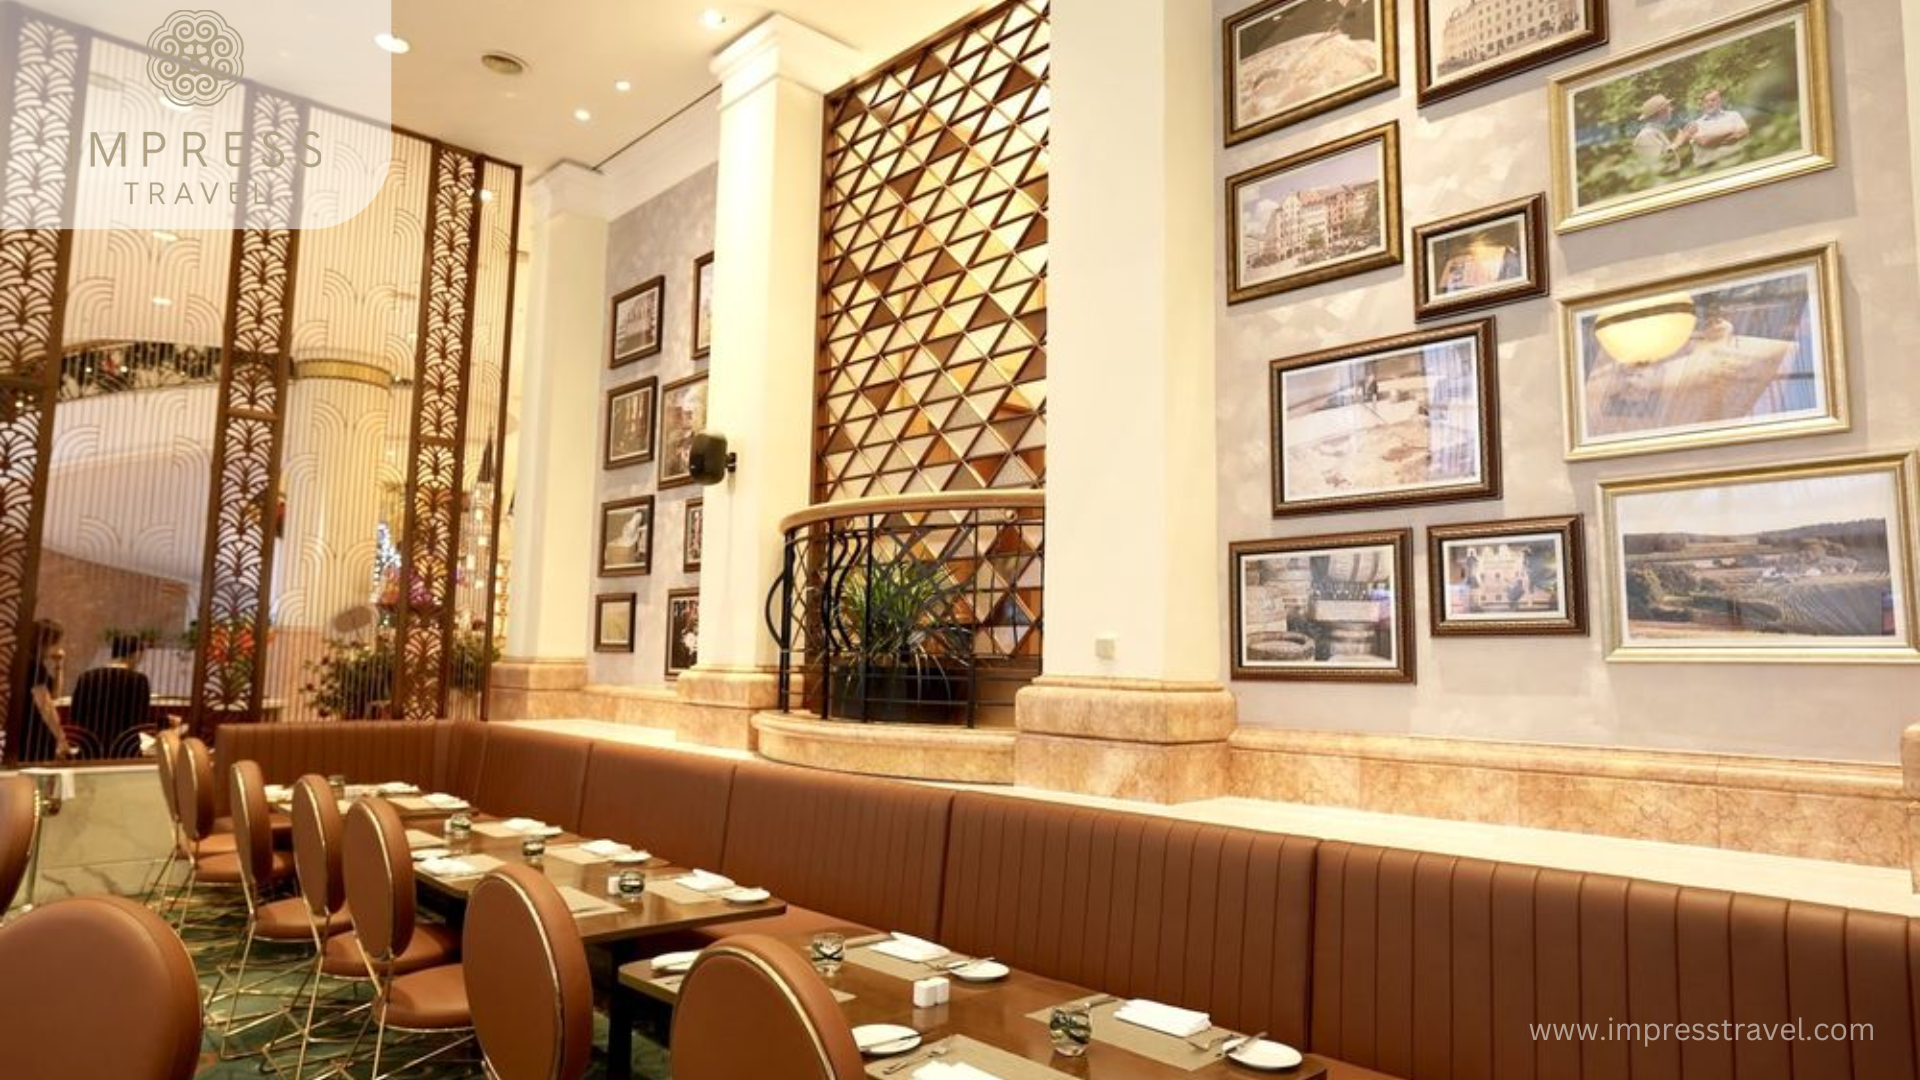 The need to enjoy Western restaurant services in Hanoi